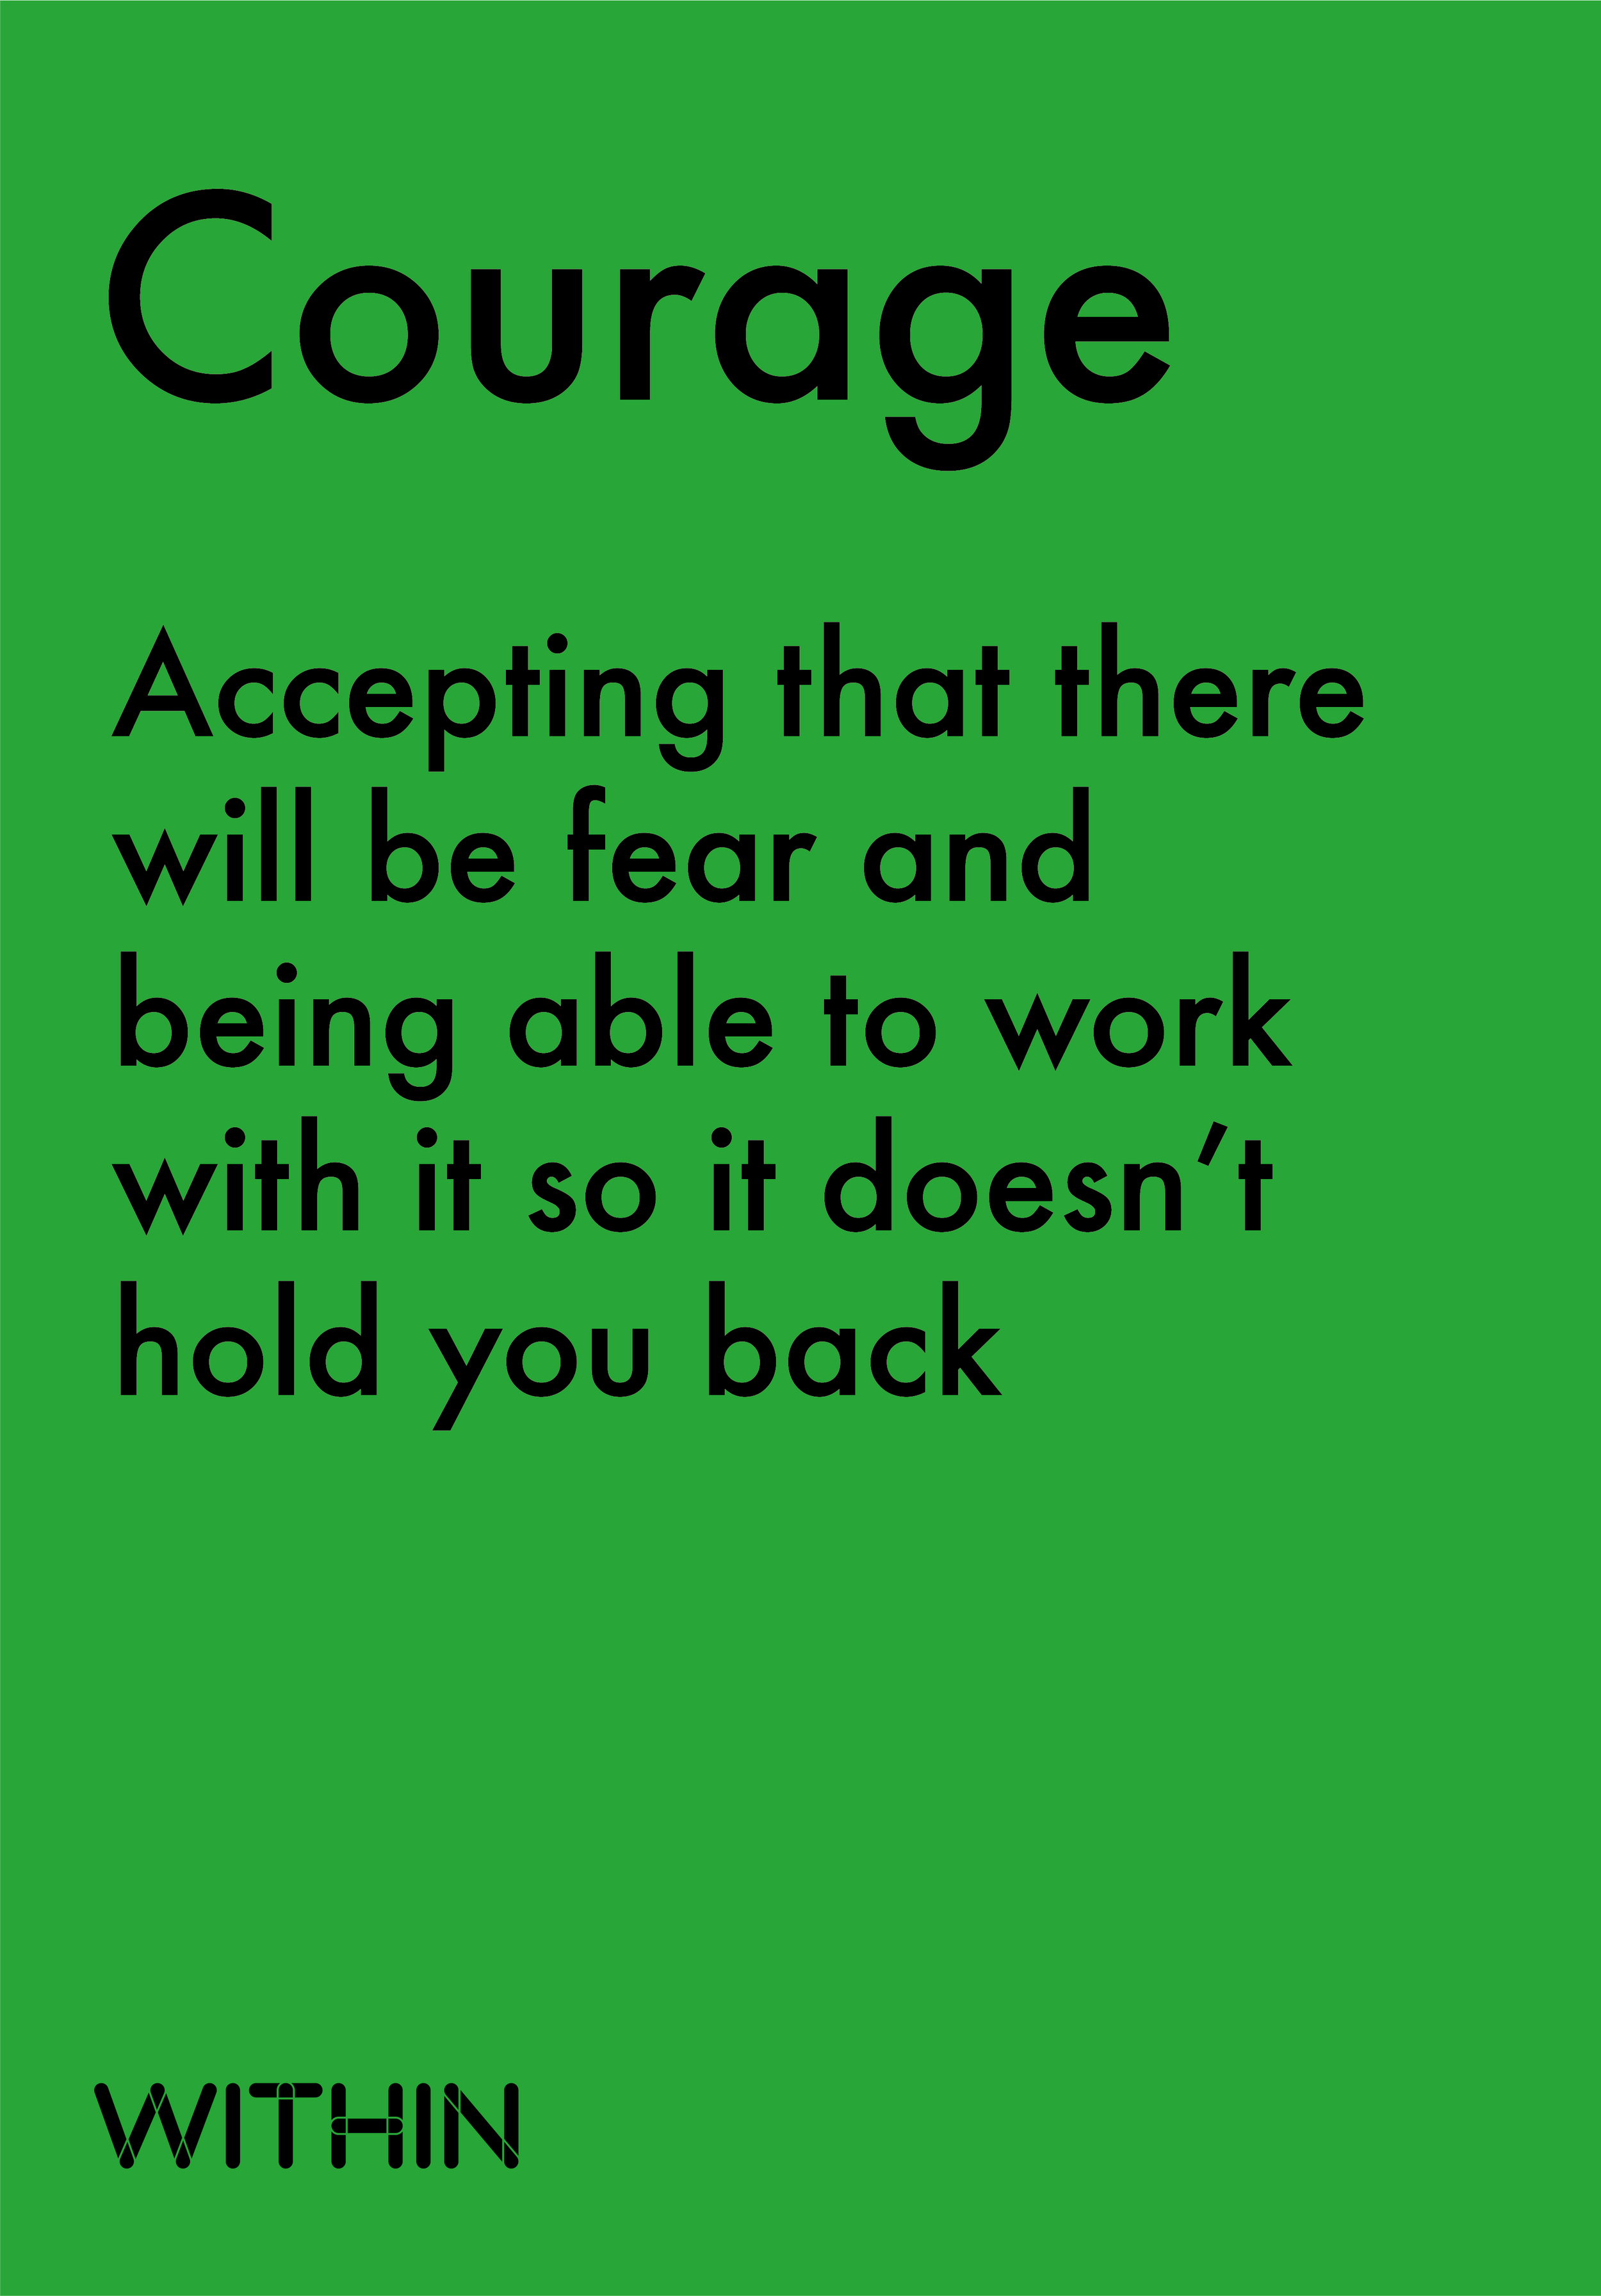 Human-Centred Leadership Values 3 Courage